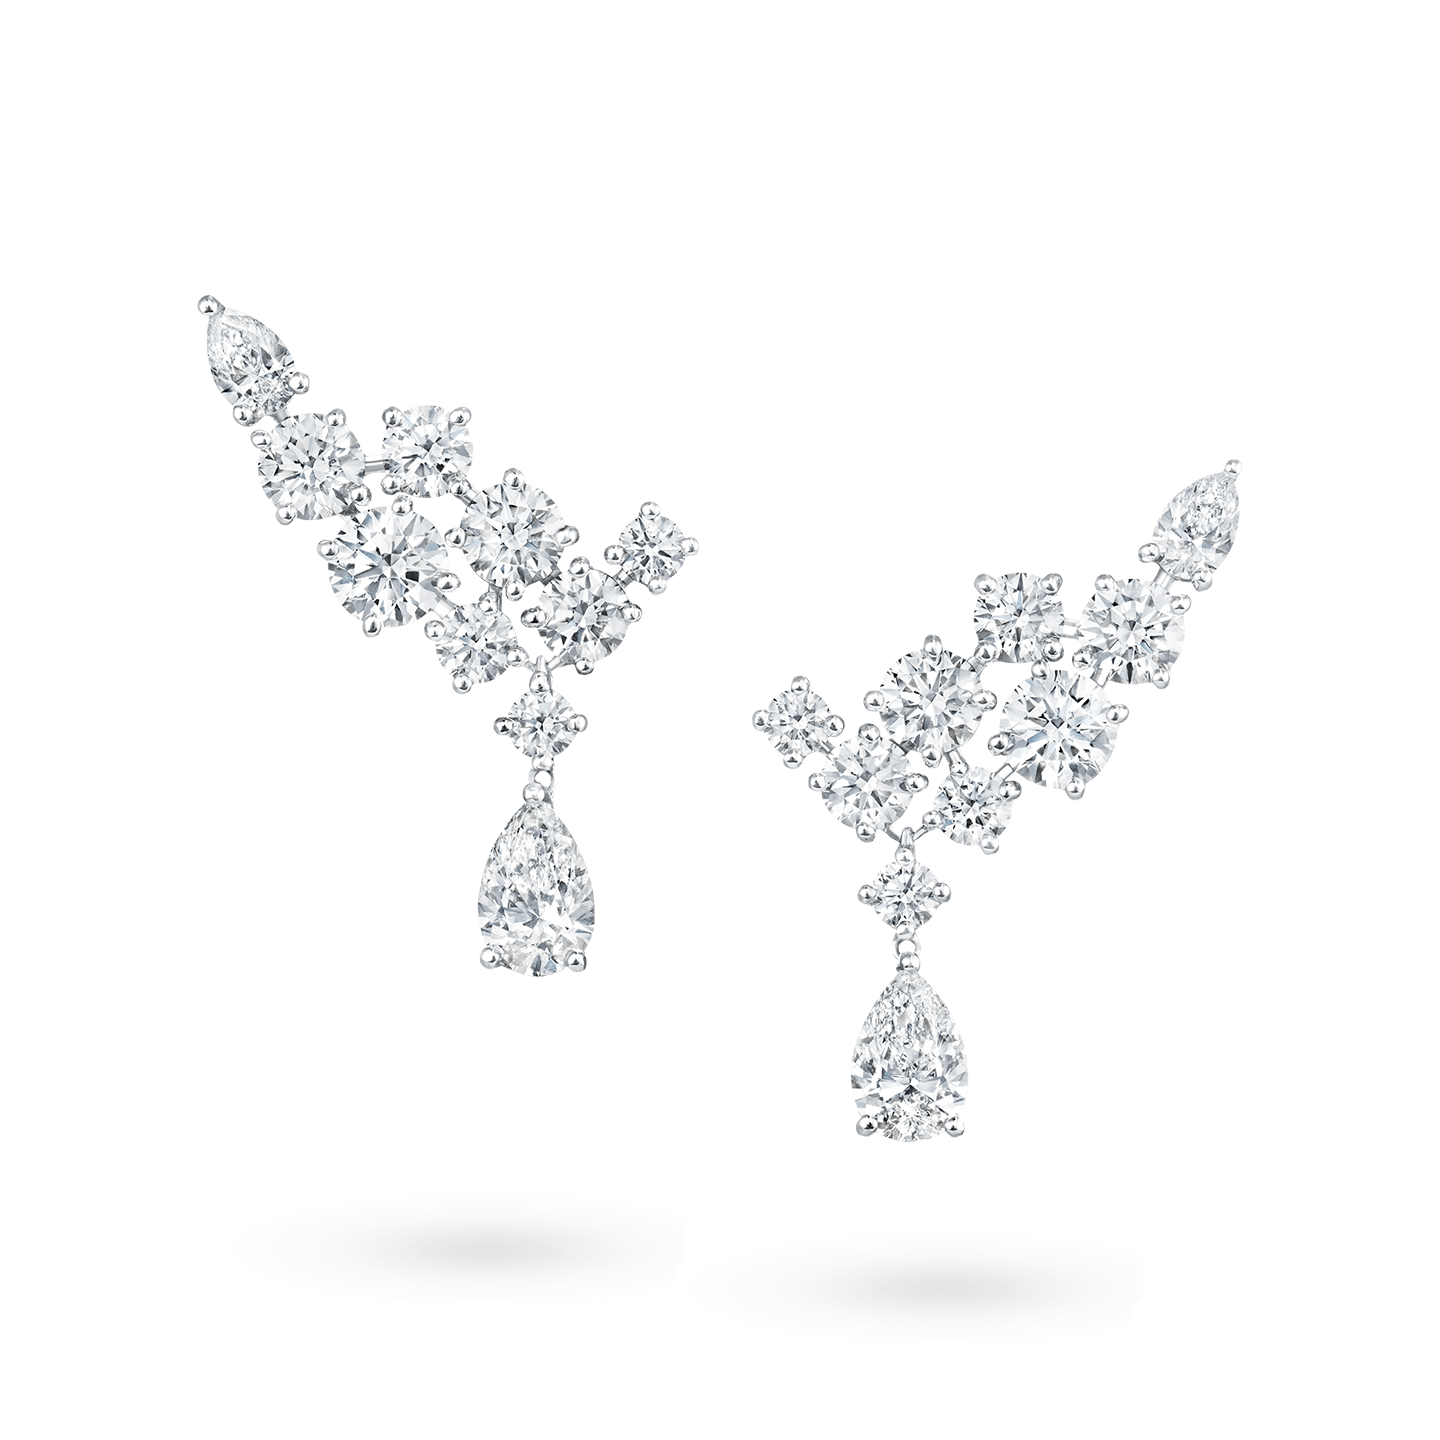 Sparkling Cluster Diamond Earrings, Product Image 1